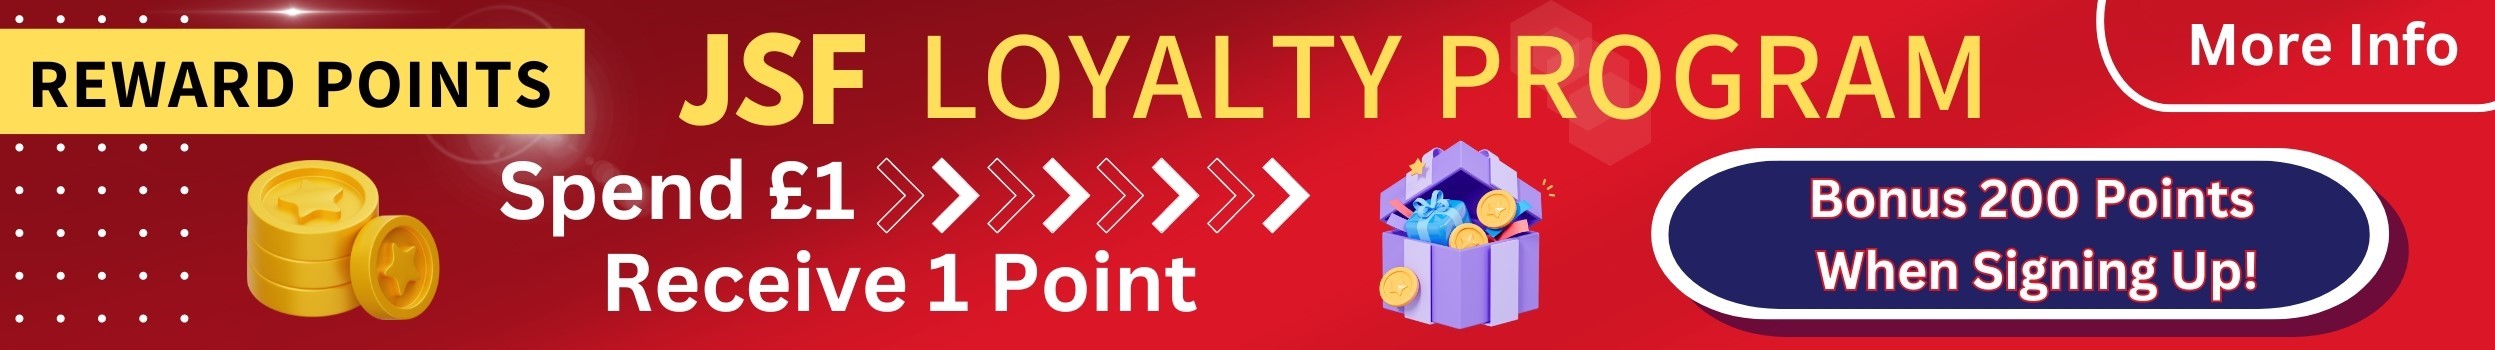 JSF rewards points, sign up and receive 200 points. £1 spent earns 1 point